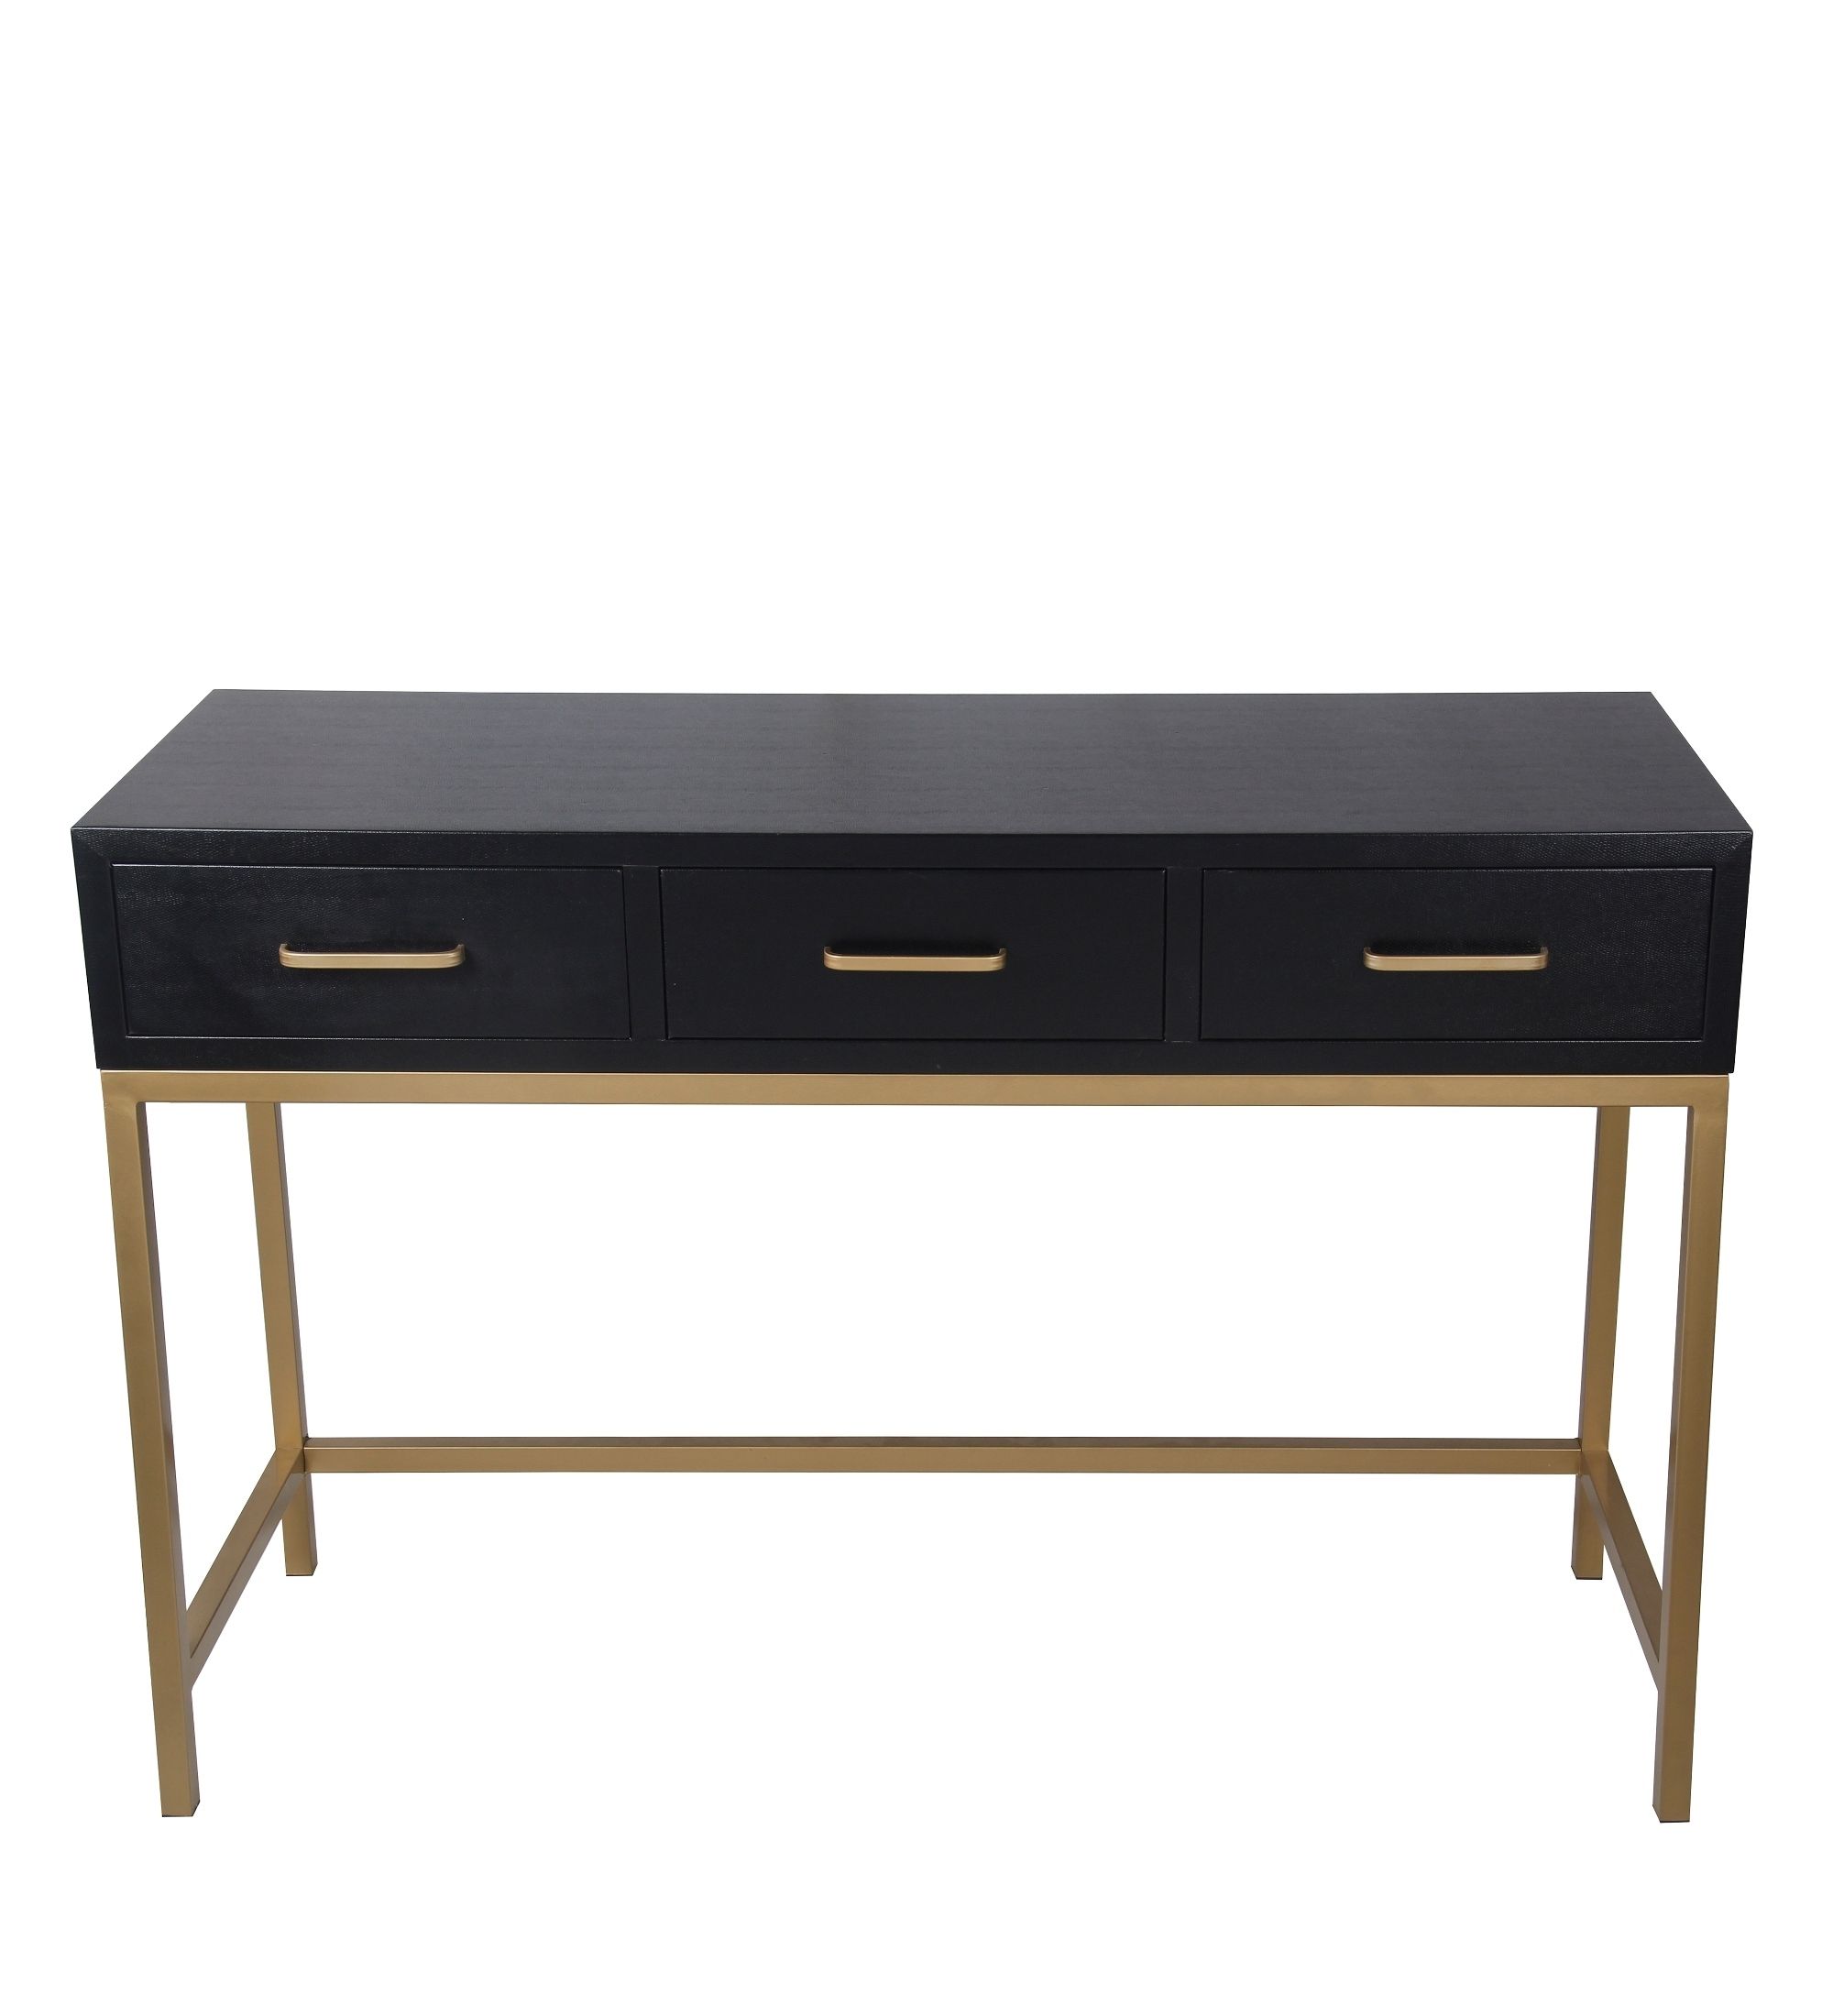 Zeckos: Privilege 68206 3 Drawer Console Table – Black Shagreen With Regard To Latest Marbled Axton Sideboards (View 12 of 20)